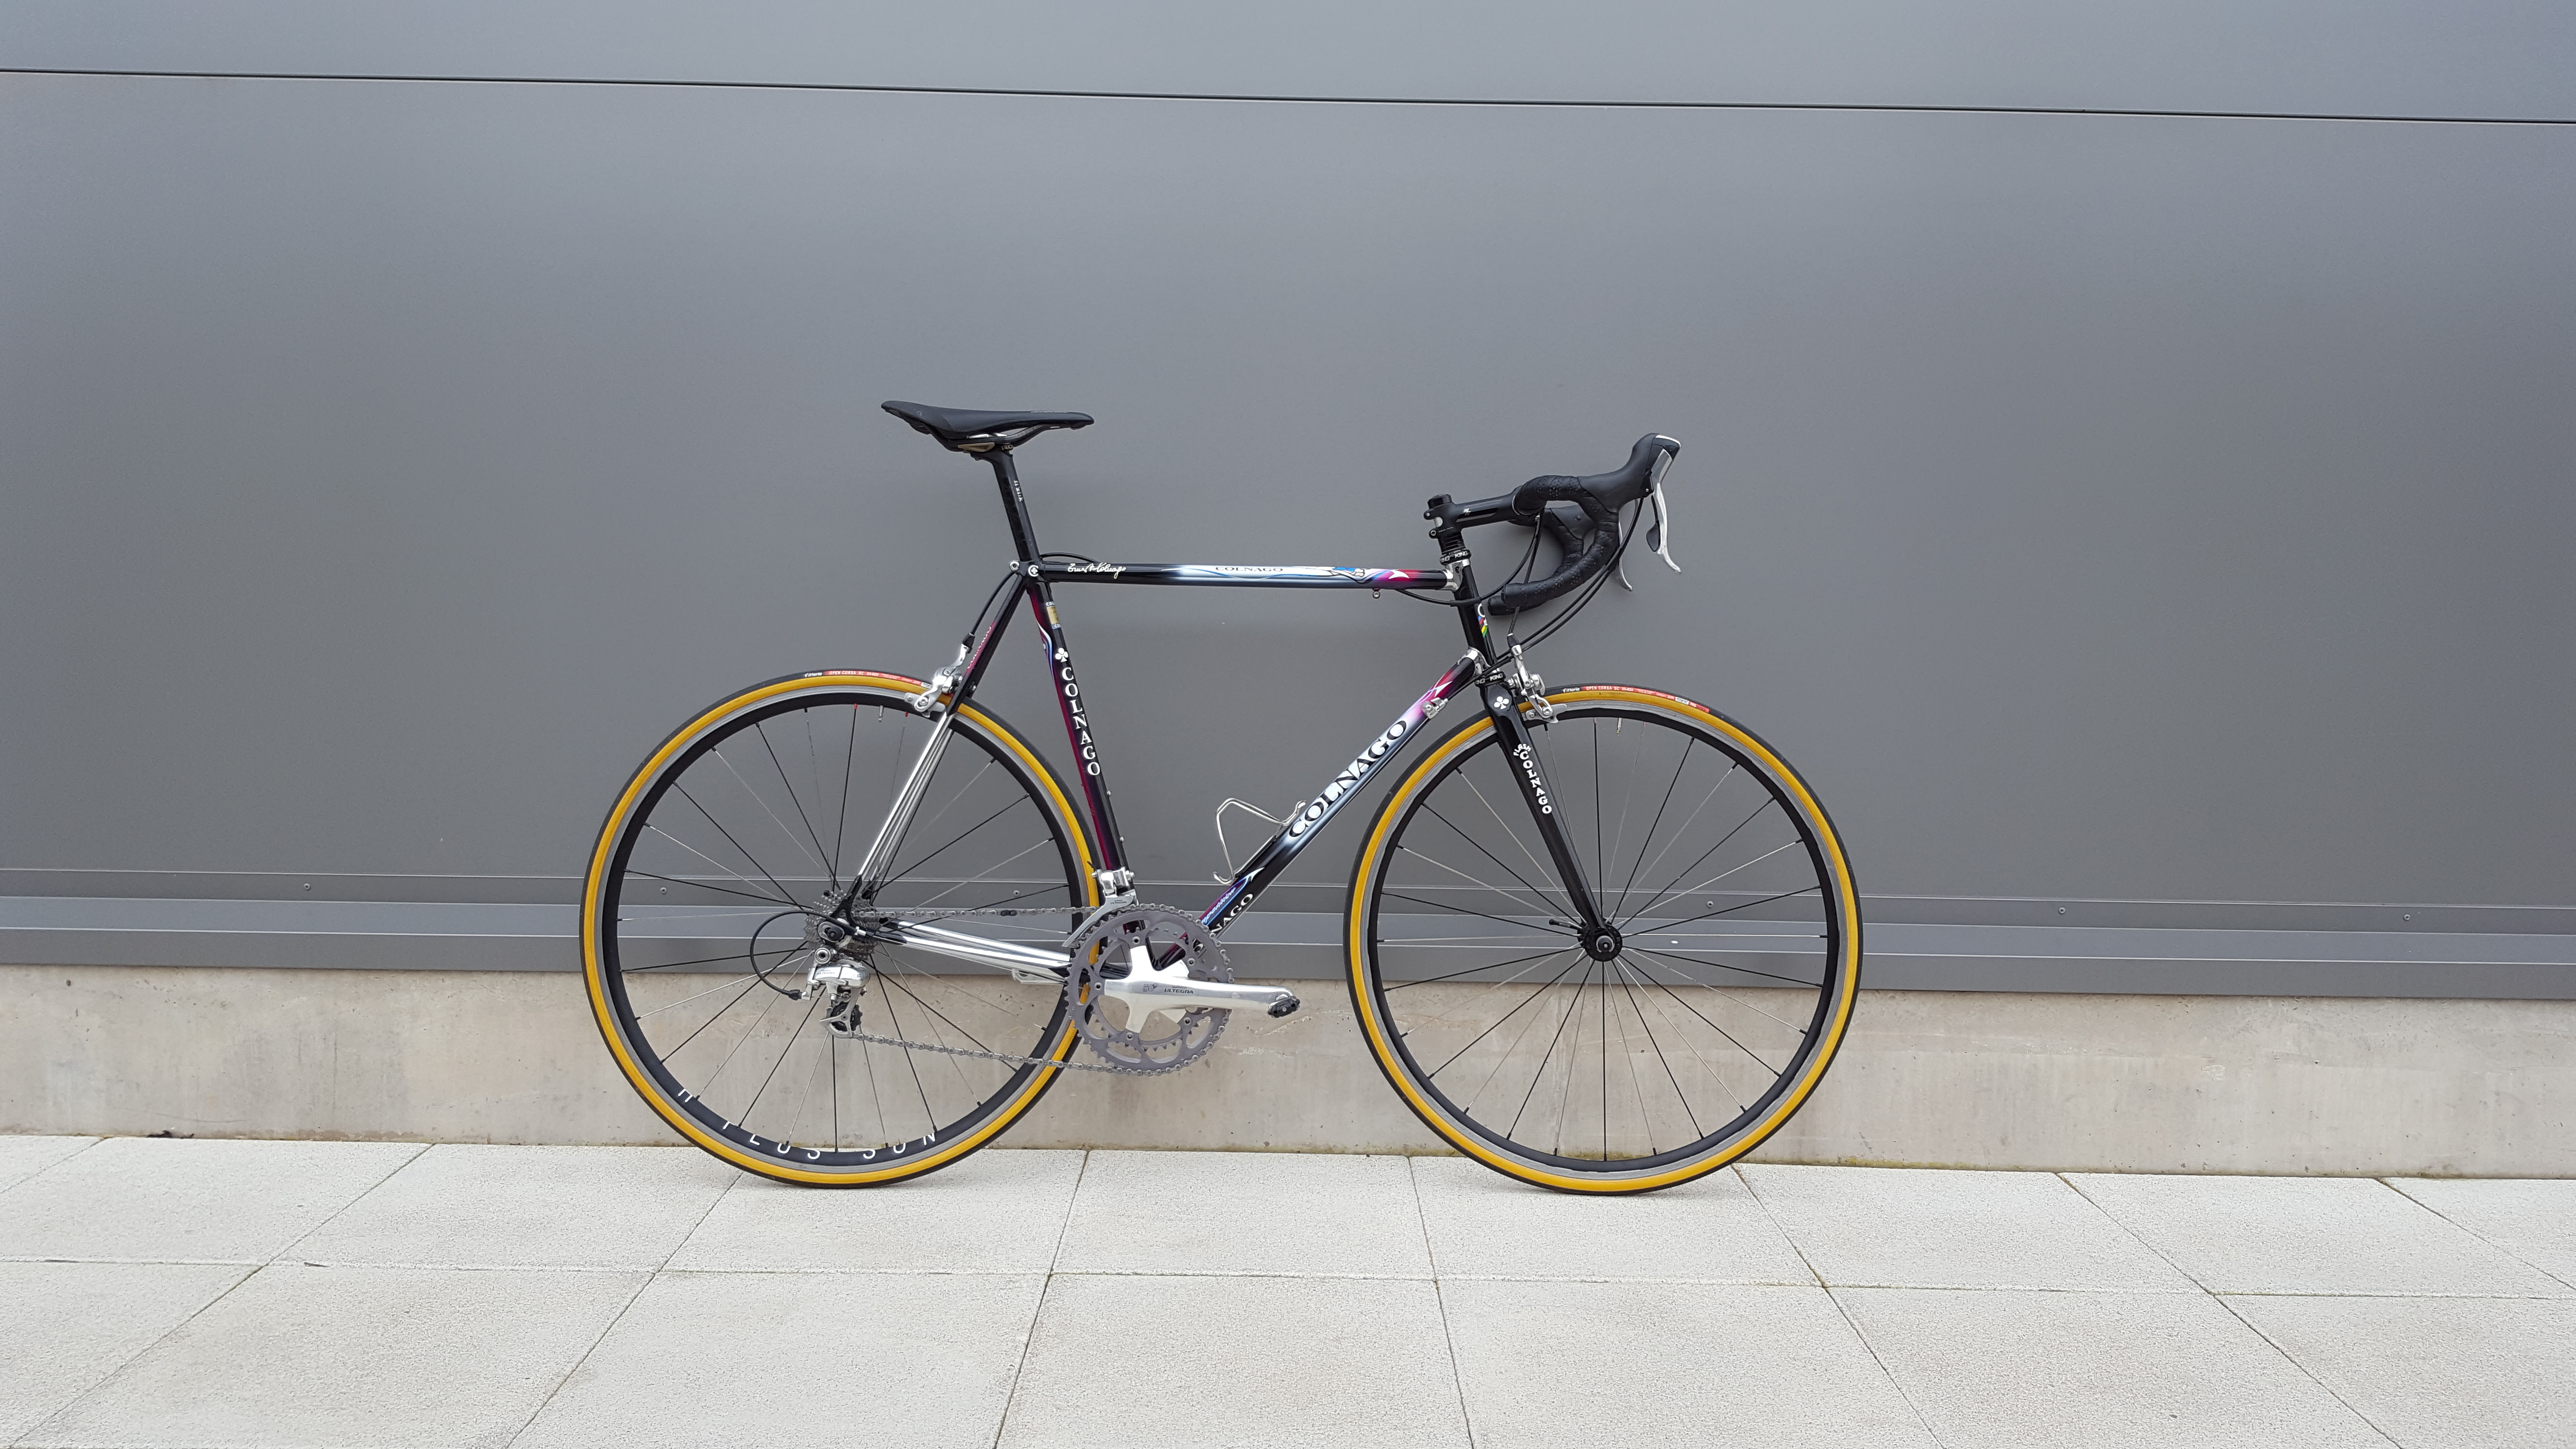 Colnago Tecnos fitted with new Vittoria cora tyres